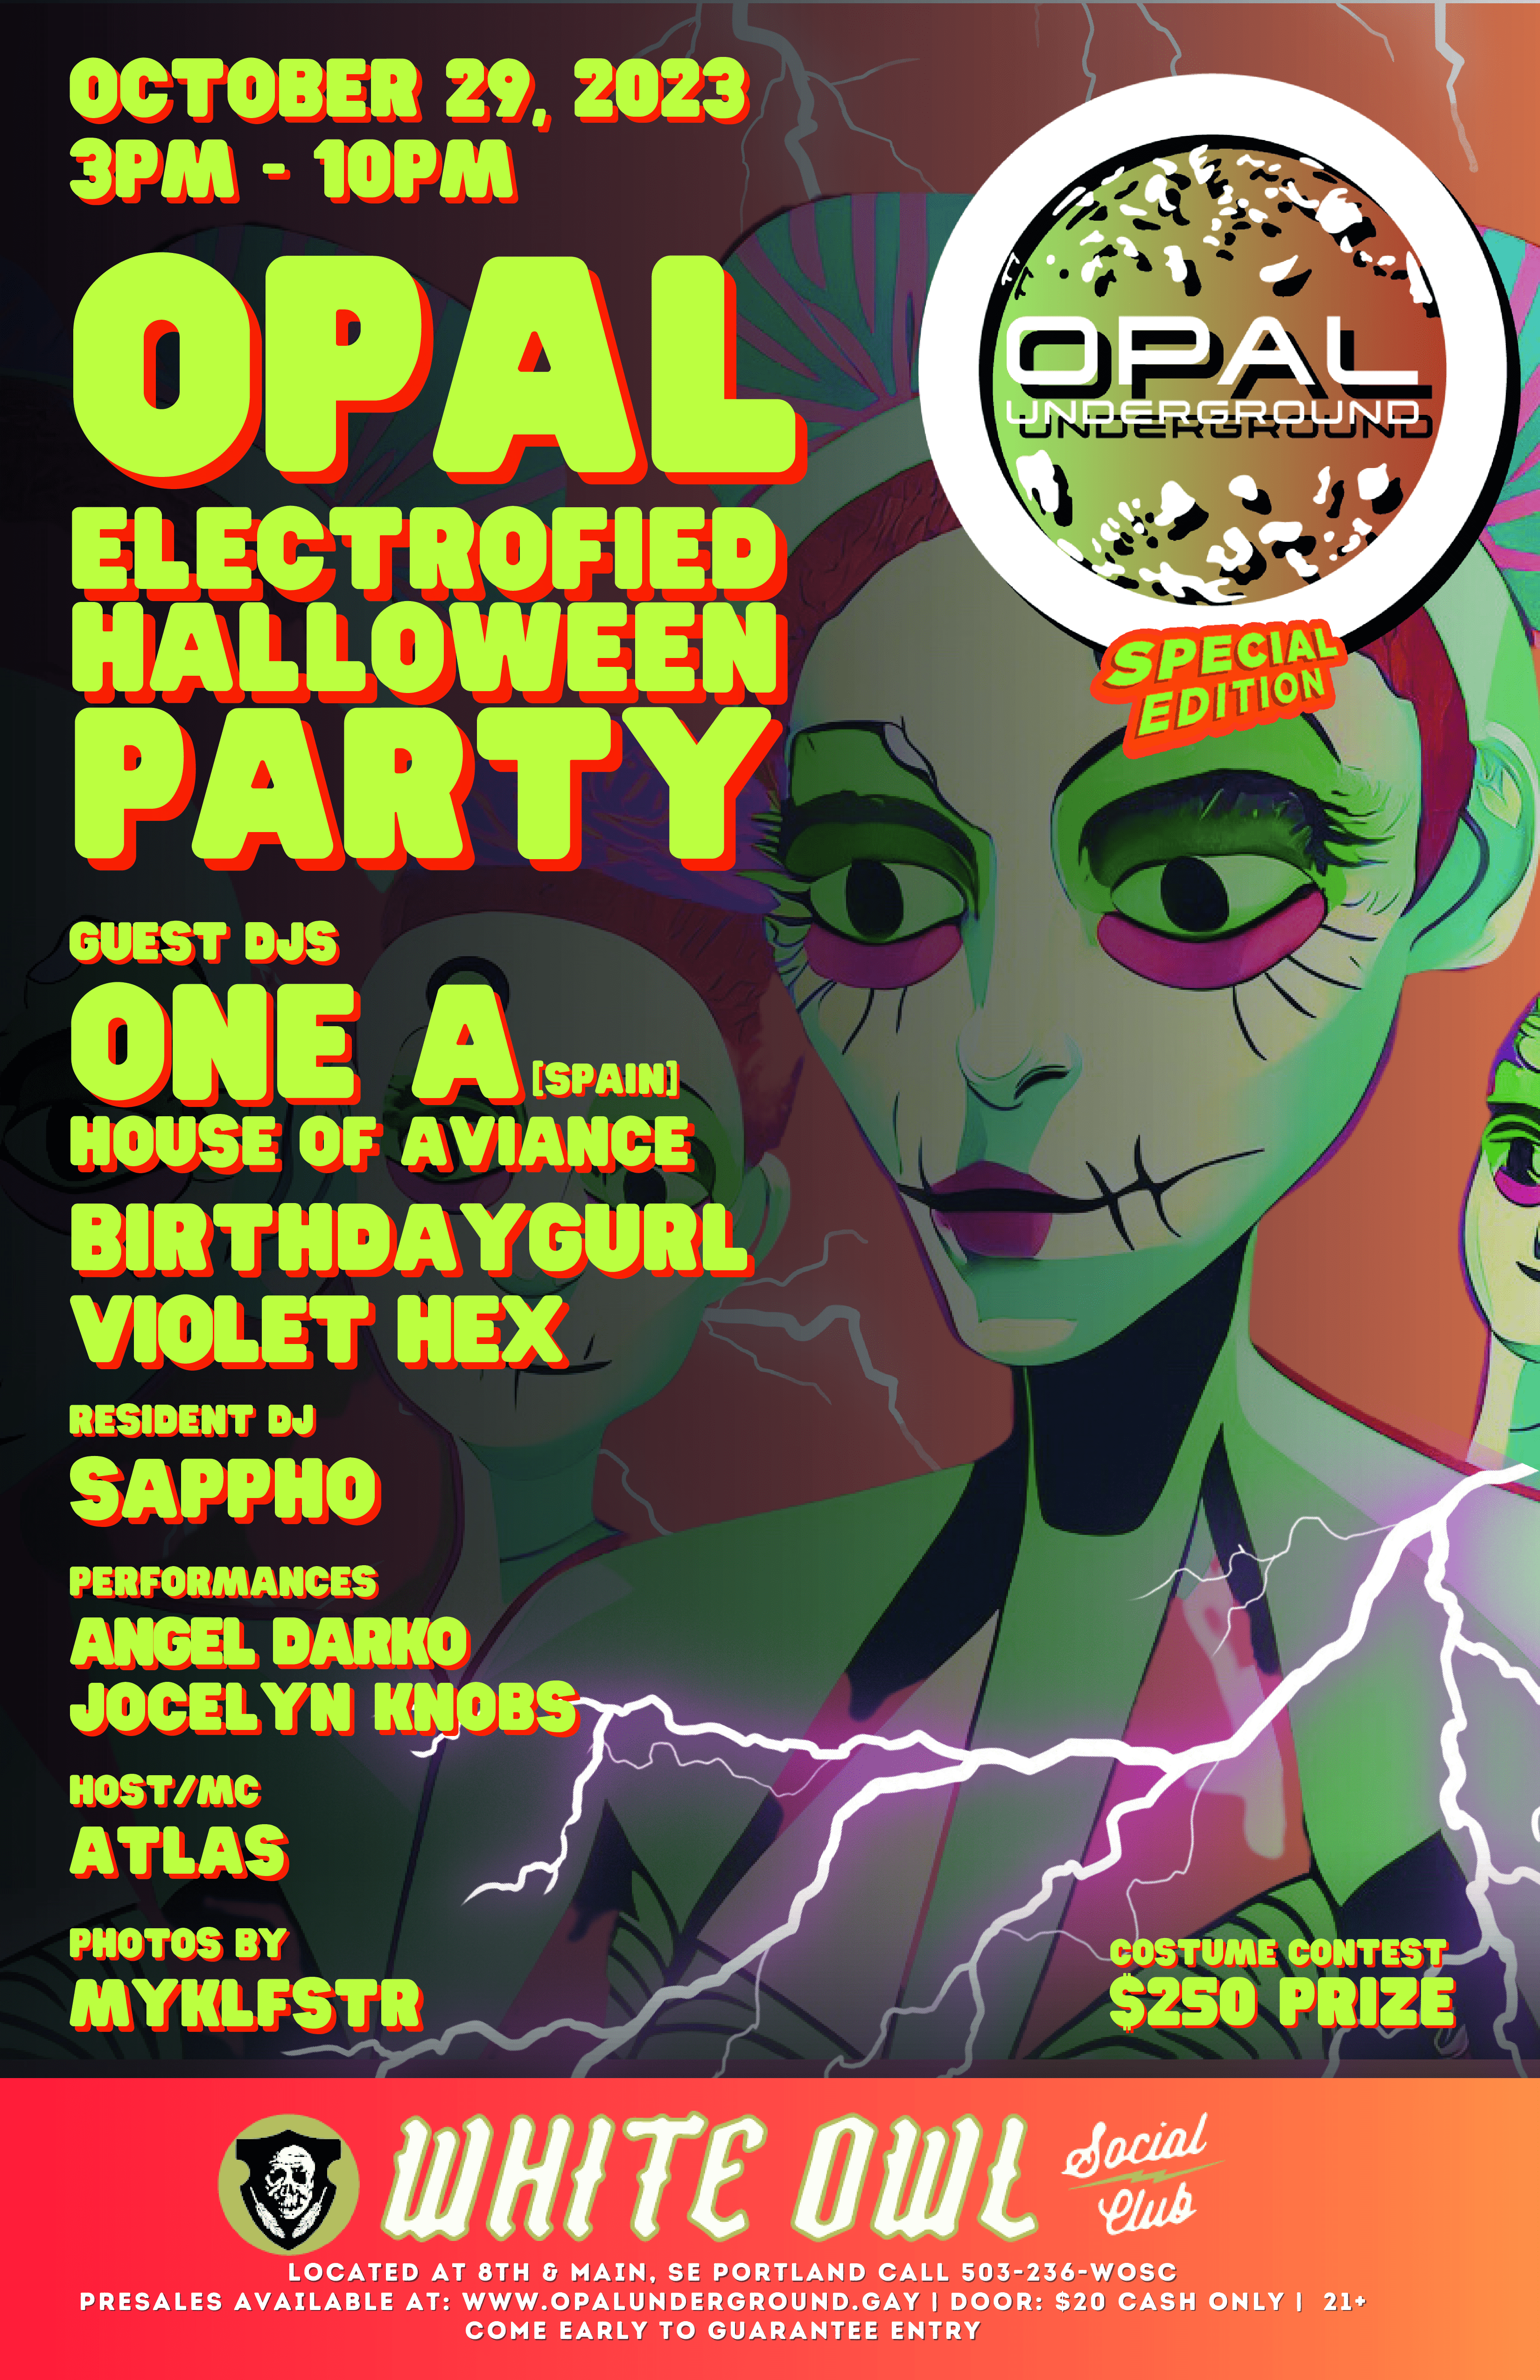 Electrofied Halloween LGBTQ+ Dance Party feat. One A from the House of Aviance - Página trasera